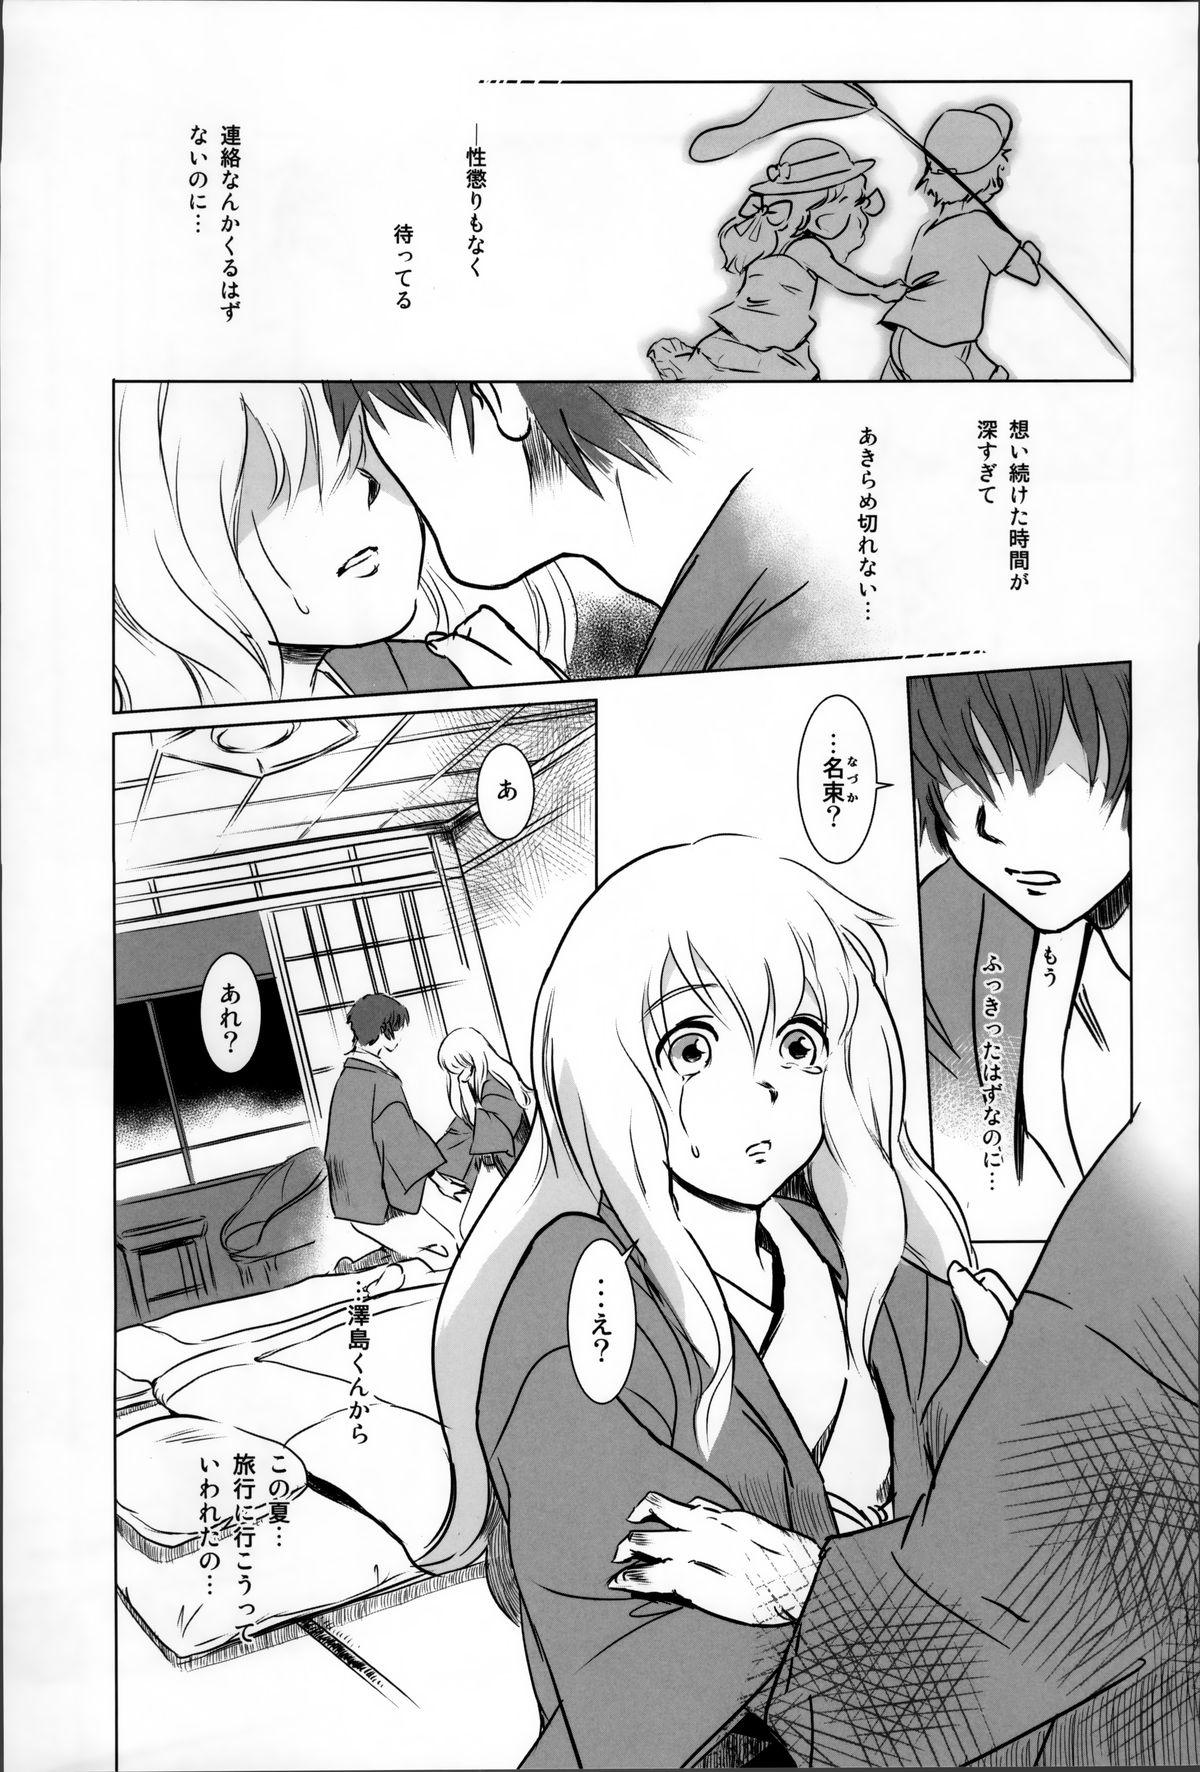 Cum On Ass Story of the 'N' Situation - Situation#2 Kokoro Utsuri Rough Fucking - Page 3